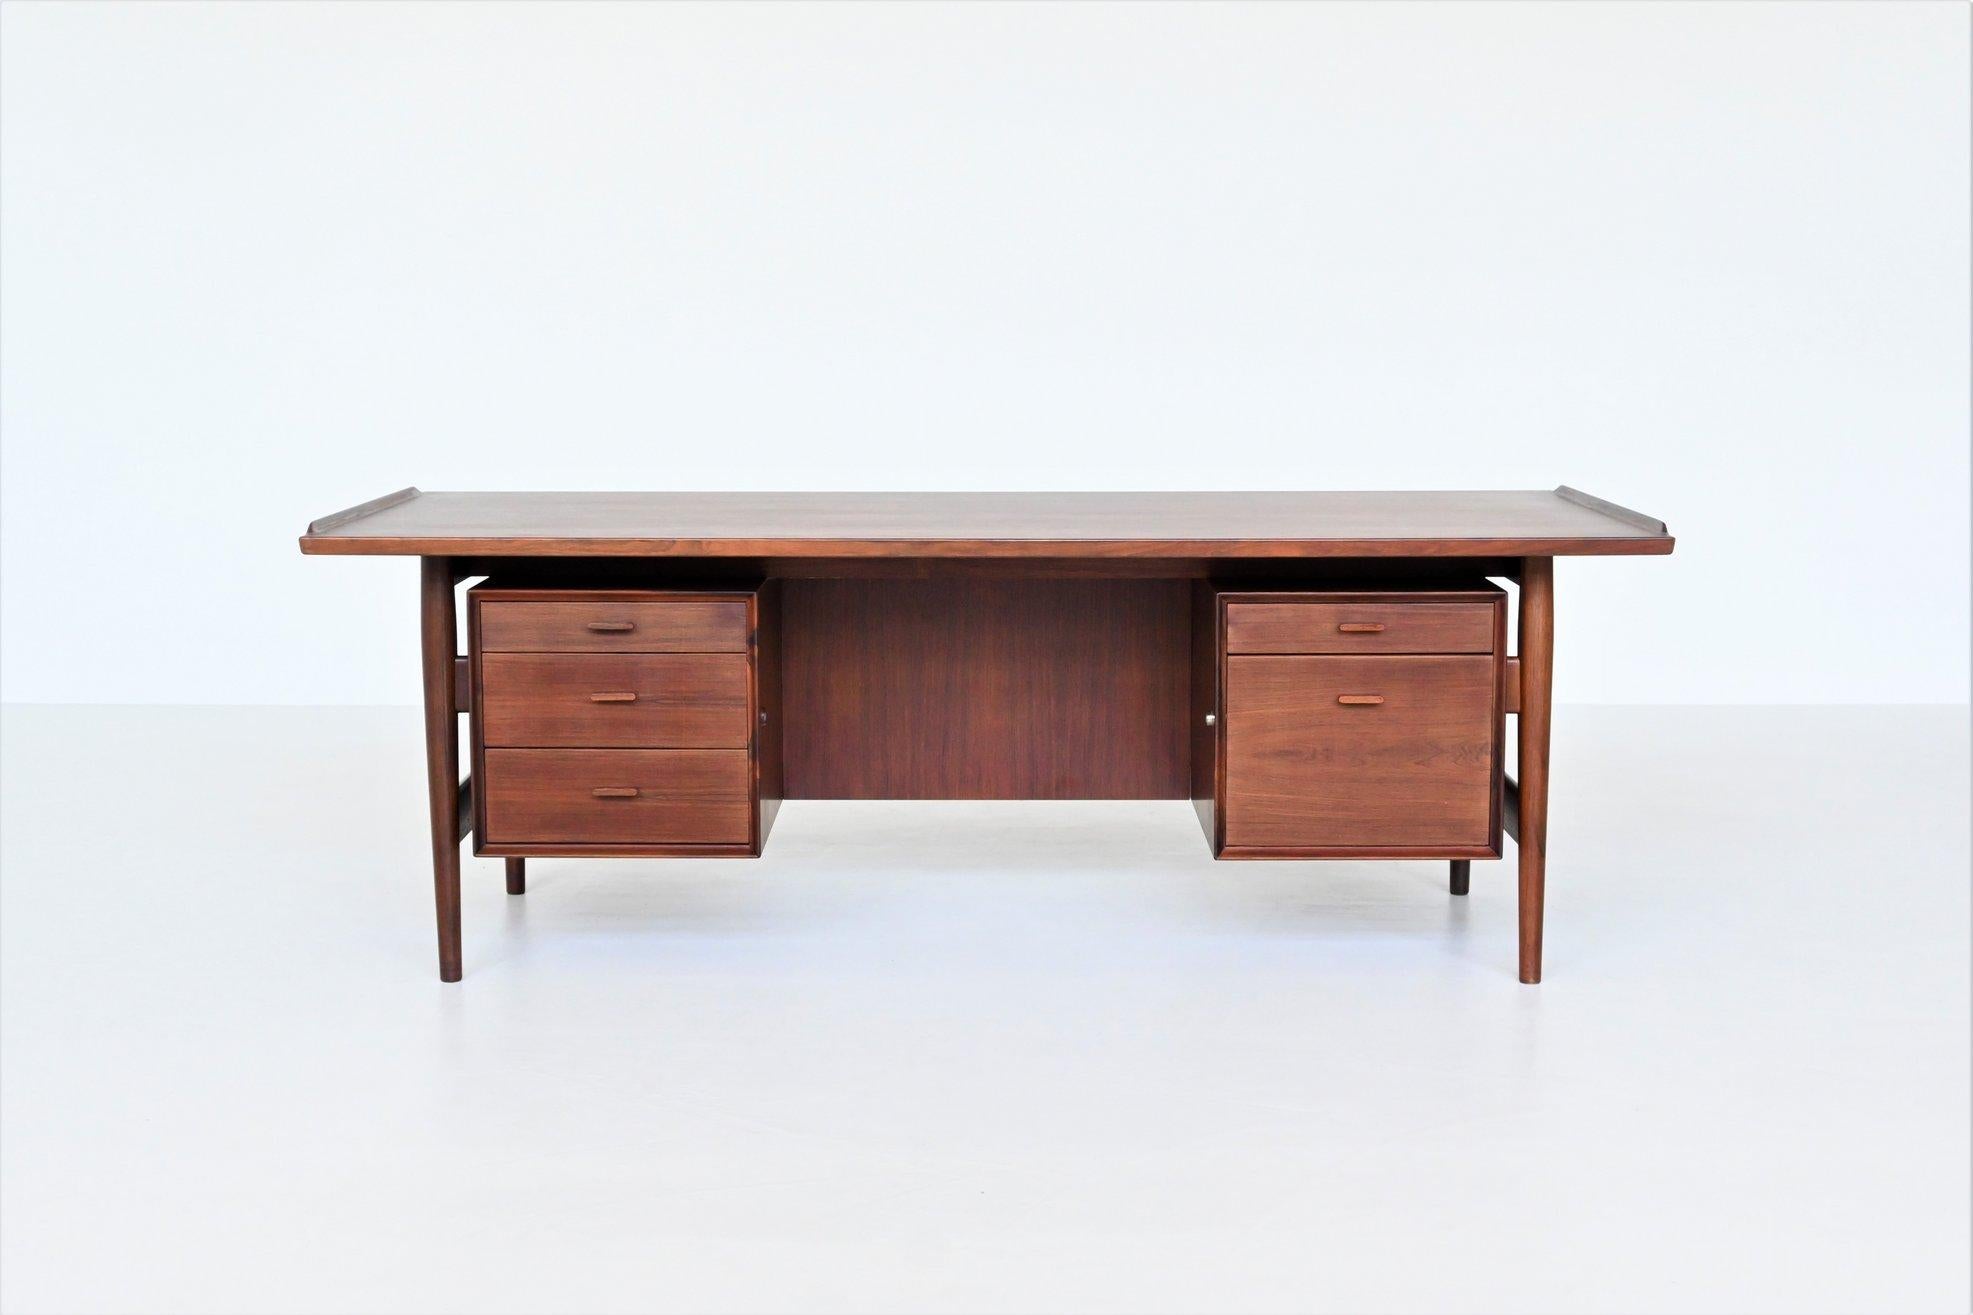 Iconic executive desk with return from the “200 series” designed by Arne Vodder; one of the best designers Denmark has known and it is manufactured by Sibast Furniture, Denmark 1960. This luxurious desk features a lot of storage space with two big